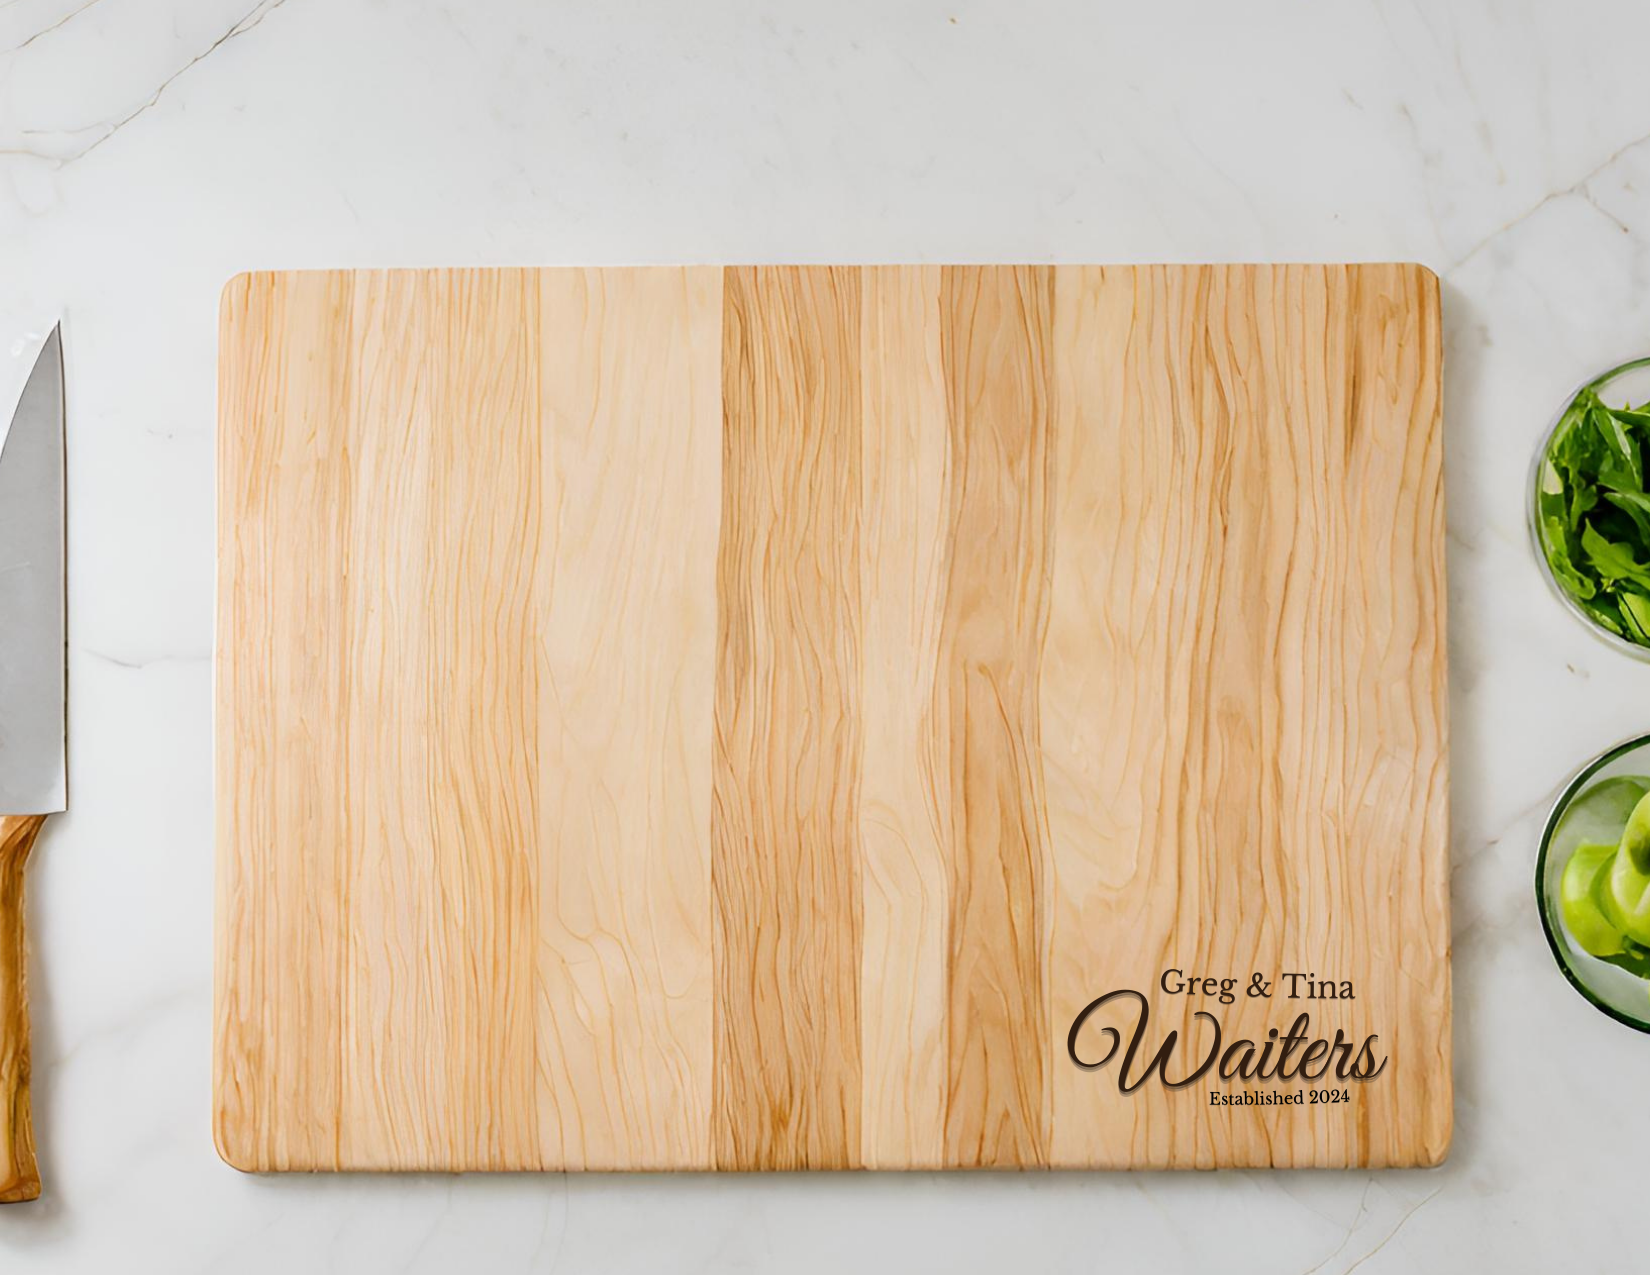 Personalized Cutting Board Wedding Gift, Bamboo Charcuterie Board| Unique Valentines Day Gift| Bridal Shower| Engraved Engagement Present| anniversary gifts| bridal shower gift| bridesmaid gifts| charcuterie board| couple gift| custom cutting board,cutting board, engagement gift,engagement gifts,housewarming gift,personalized gifts,valentines Day gift,wedding gift